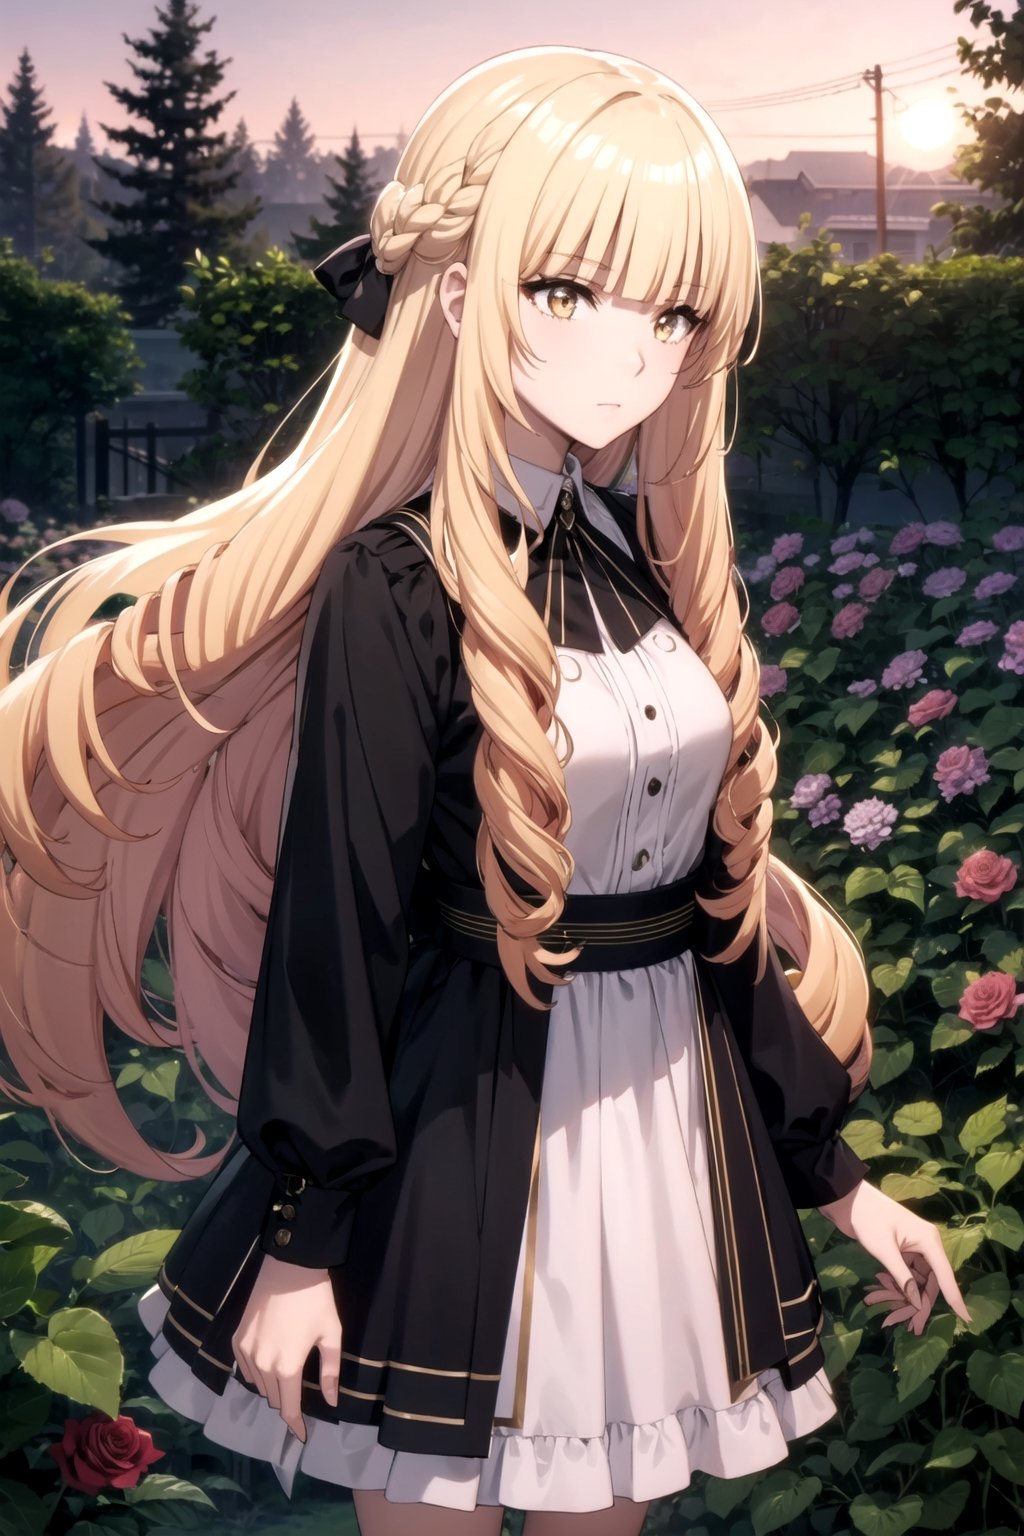 //Quality,
masterpiece, best quality
,//Character,
1girl, solo
,//Fashion,
,//Background,
night, black Rose garden
,//Others,
,rose, blonde hair, dress